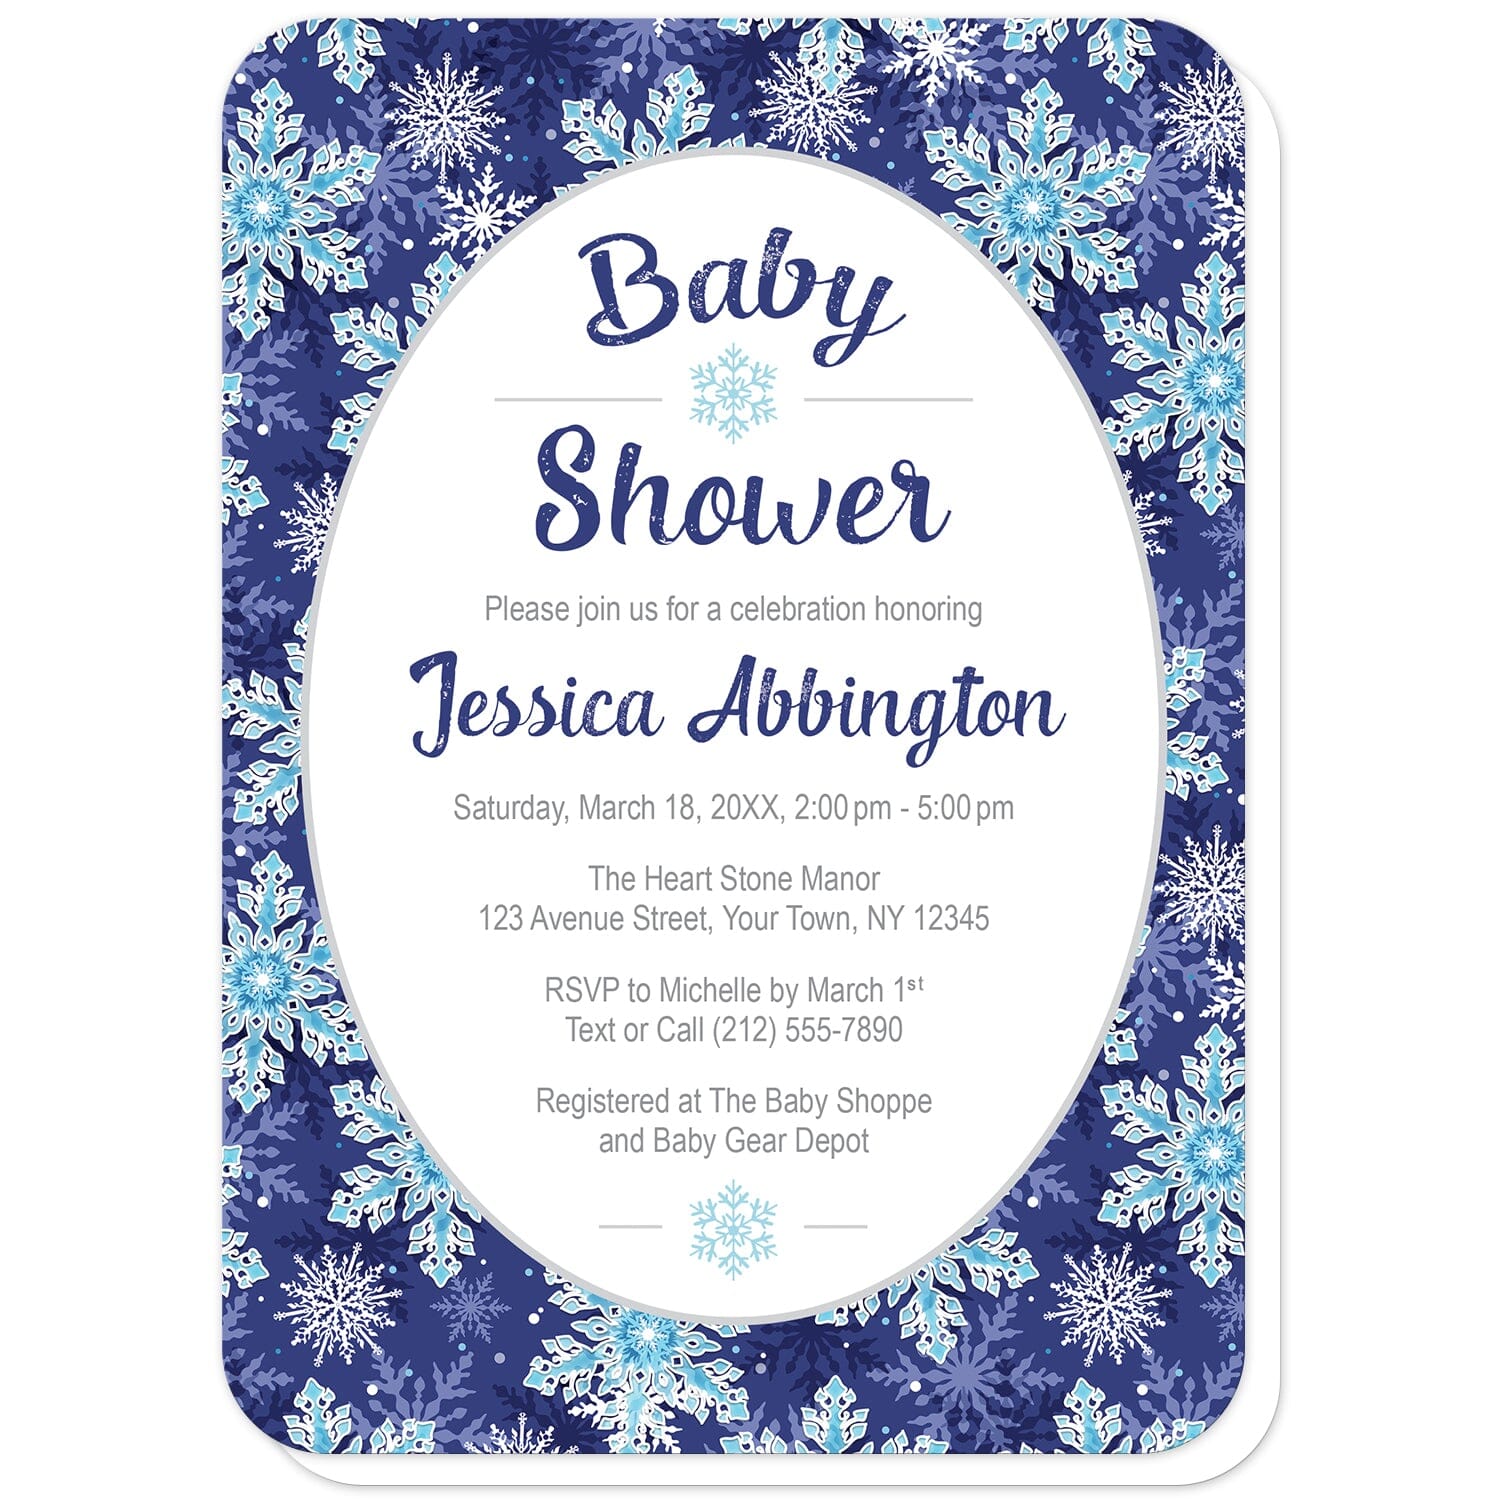 Navy Blue Snowflake Baby Shower Invitations (with rounded corners) at Artistically Invited. Beautifully ornate navy blue snowflake baby shower invitations with your personalized baby shower celebration details custom printed in blue and gray in a white oval frame design over a pretty navy blue, aqua blue, and white snowflake pattern background.